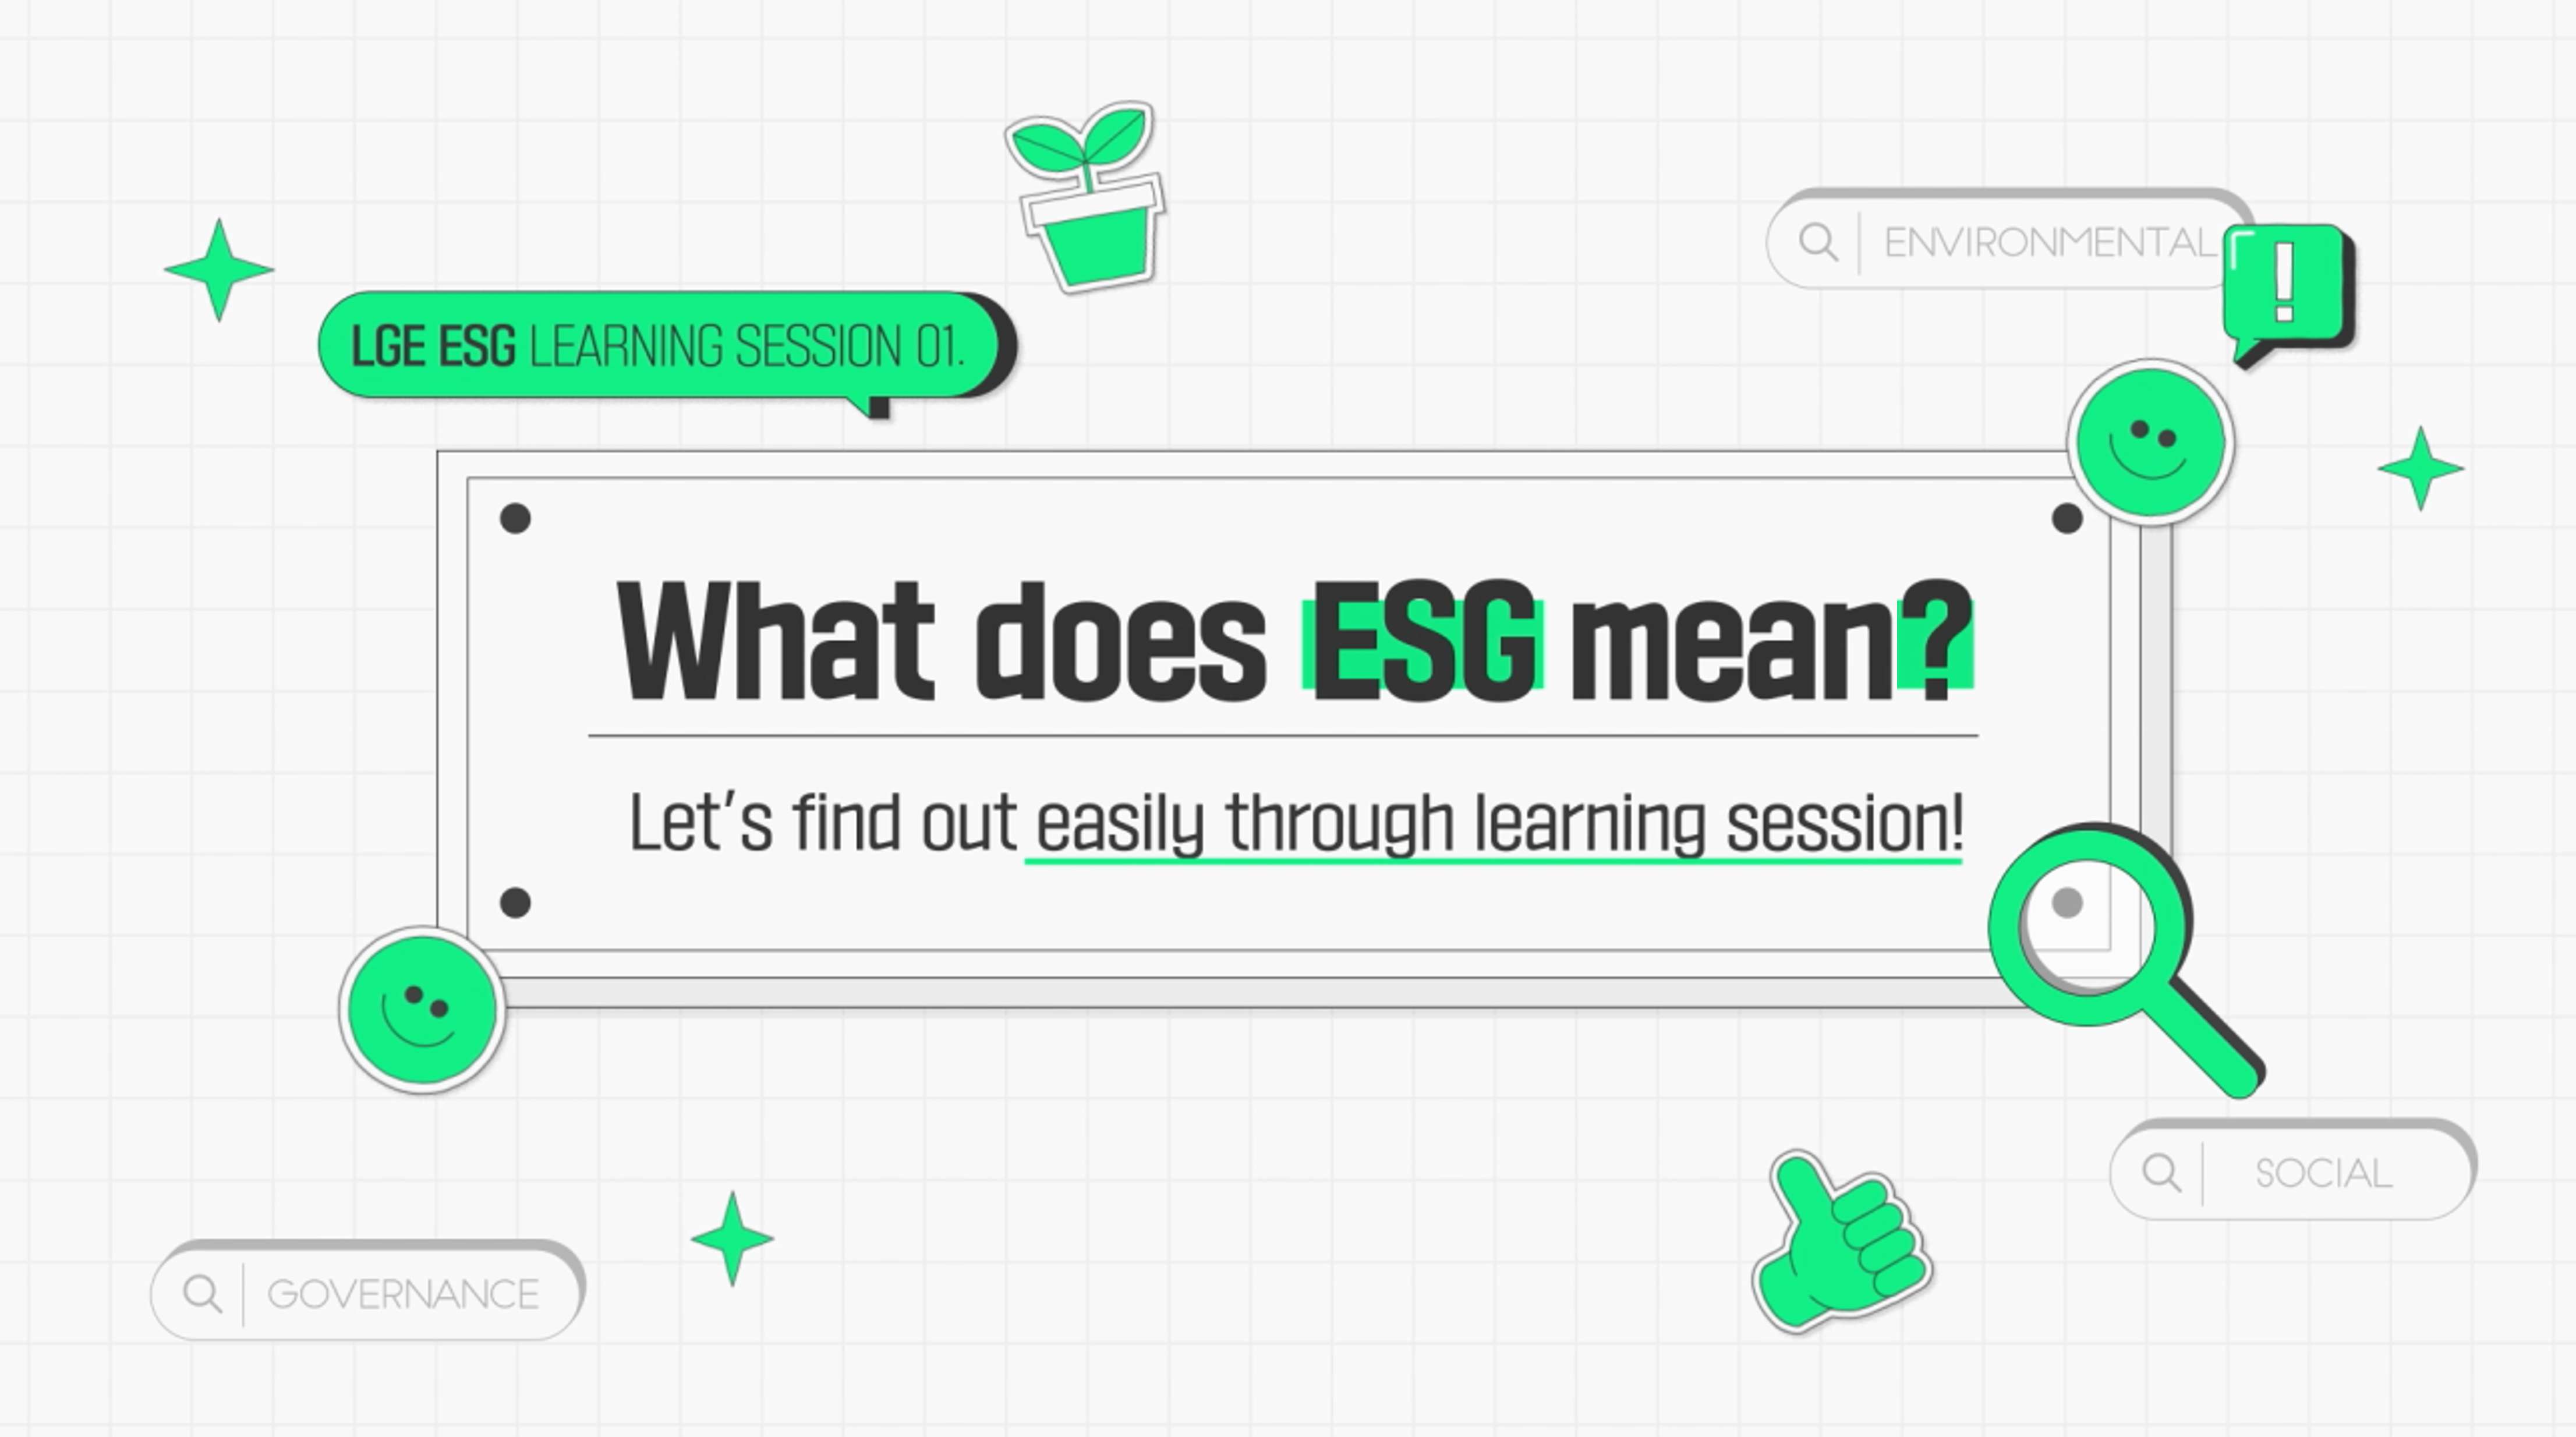 Image depicting the first lesson of LG's ESG training program for its employees with the phrases "What does ESG mean?" and "Let's find out easily through learning session!"